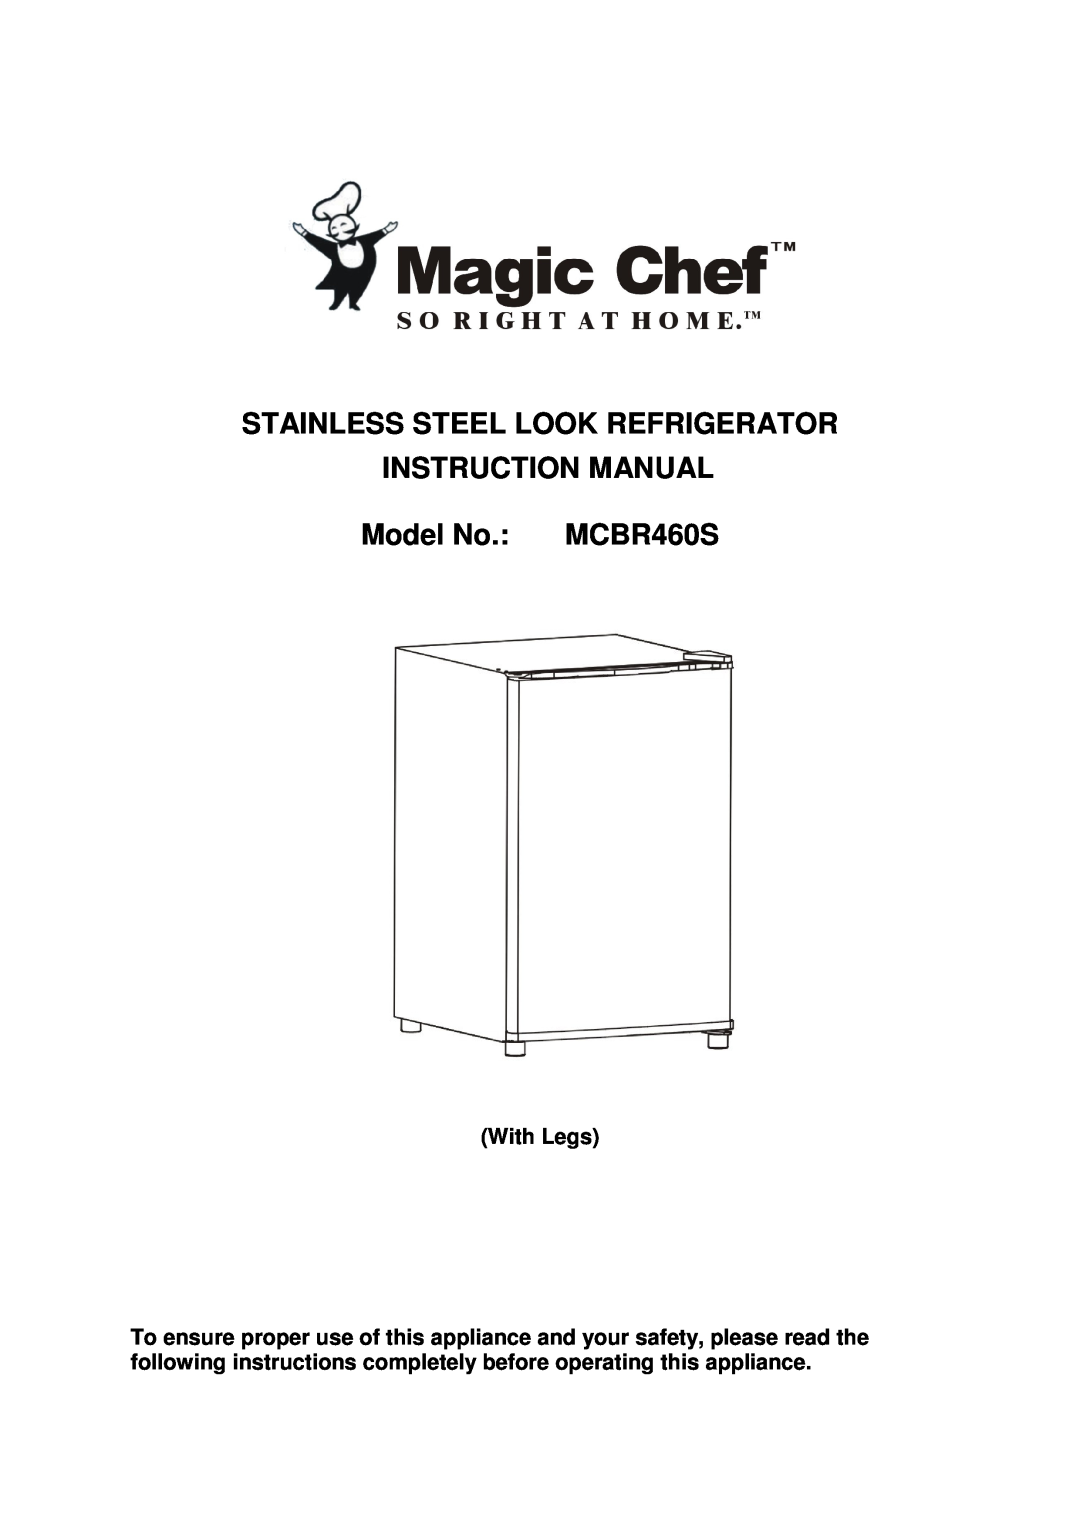 Magic Chef MCBR460S instruction manual Stainless Steel Look Refrigerator, With Legs 